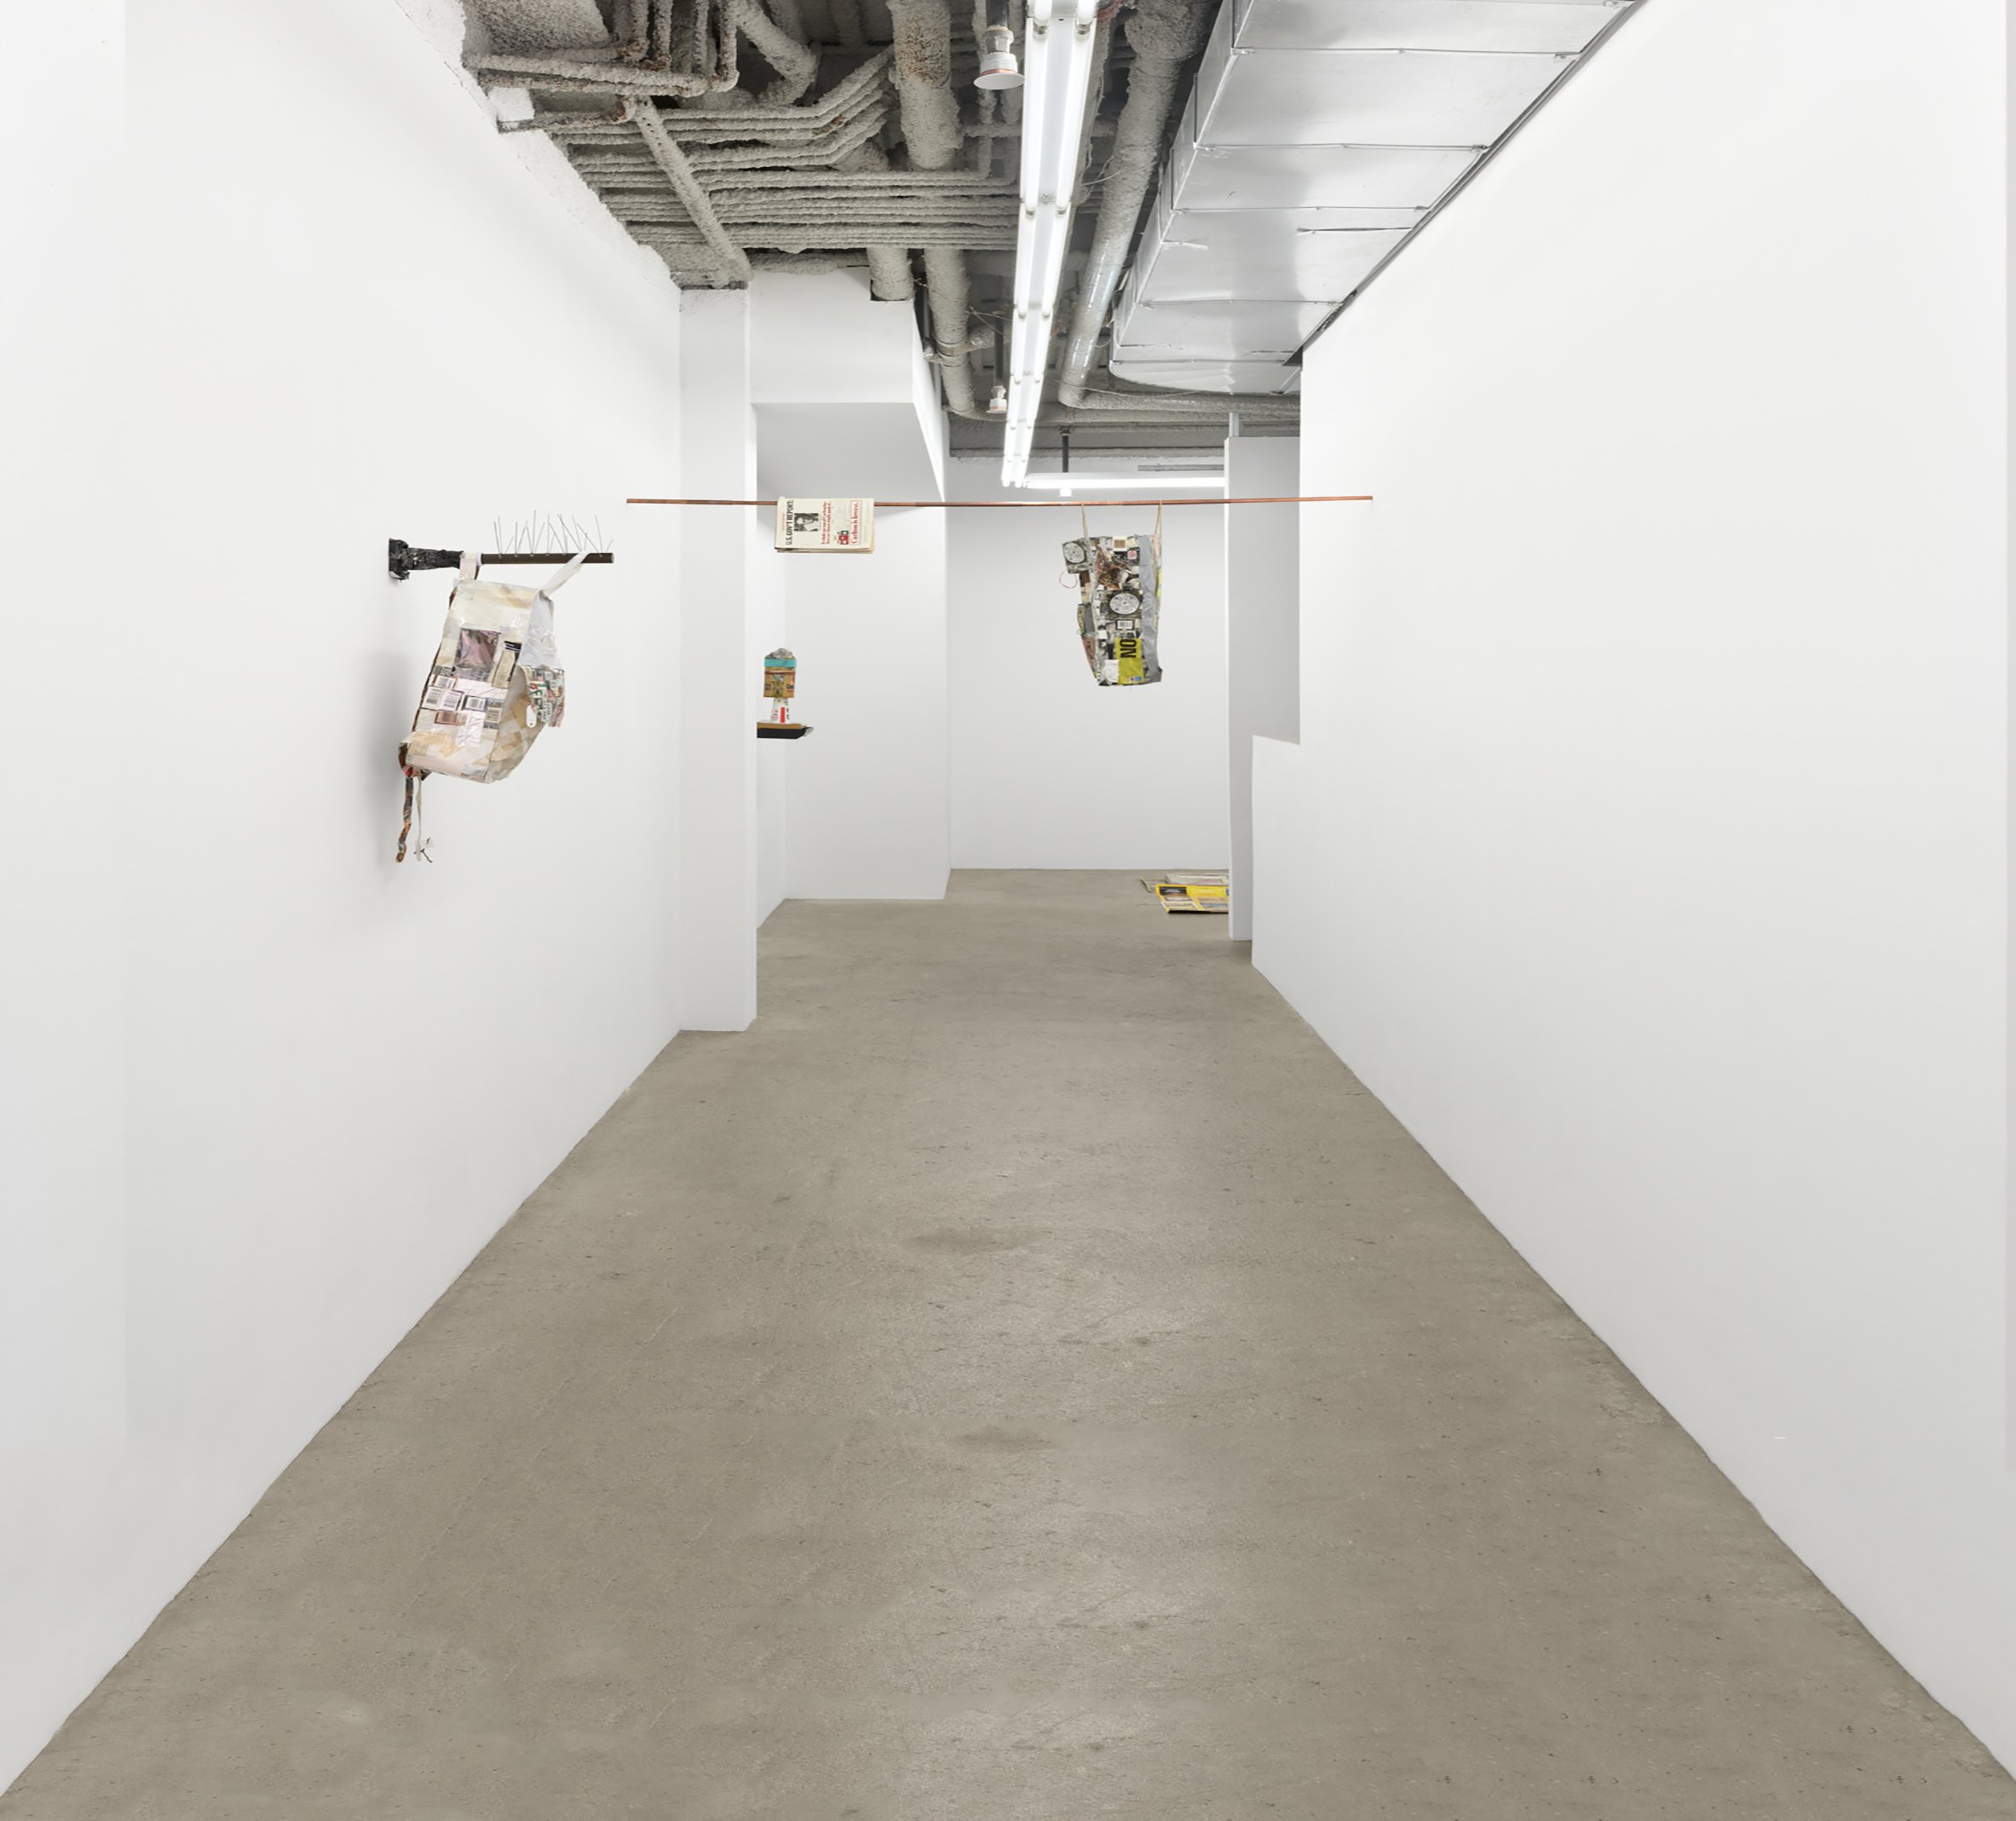  Elzie Williams III  Politics As Usual  installation view, middle gallery 